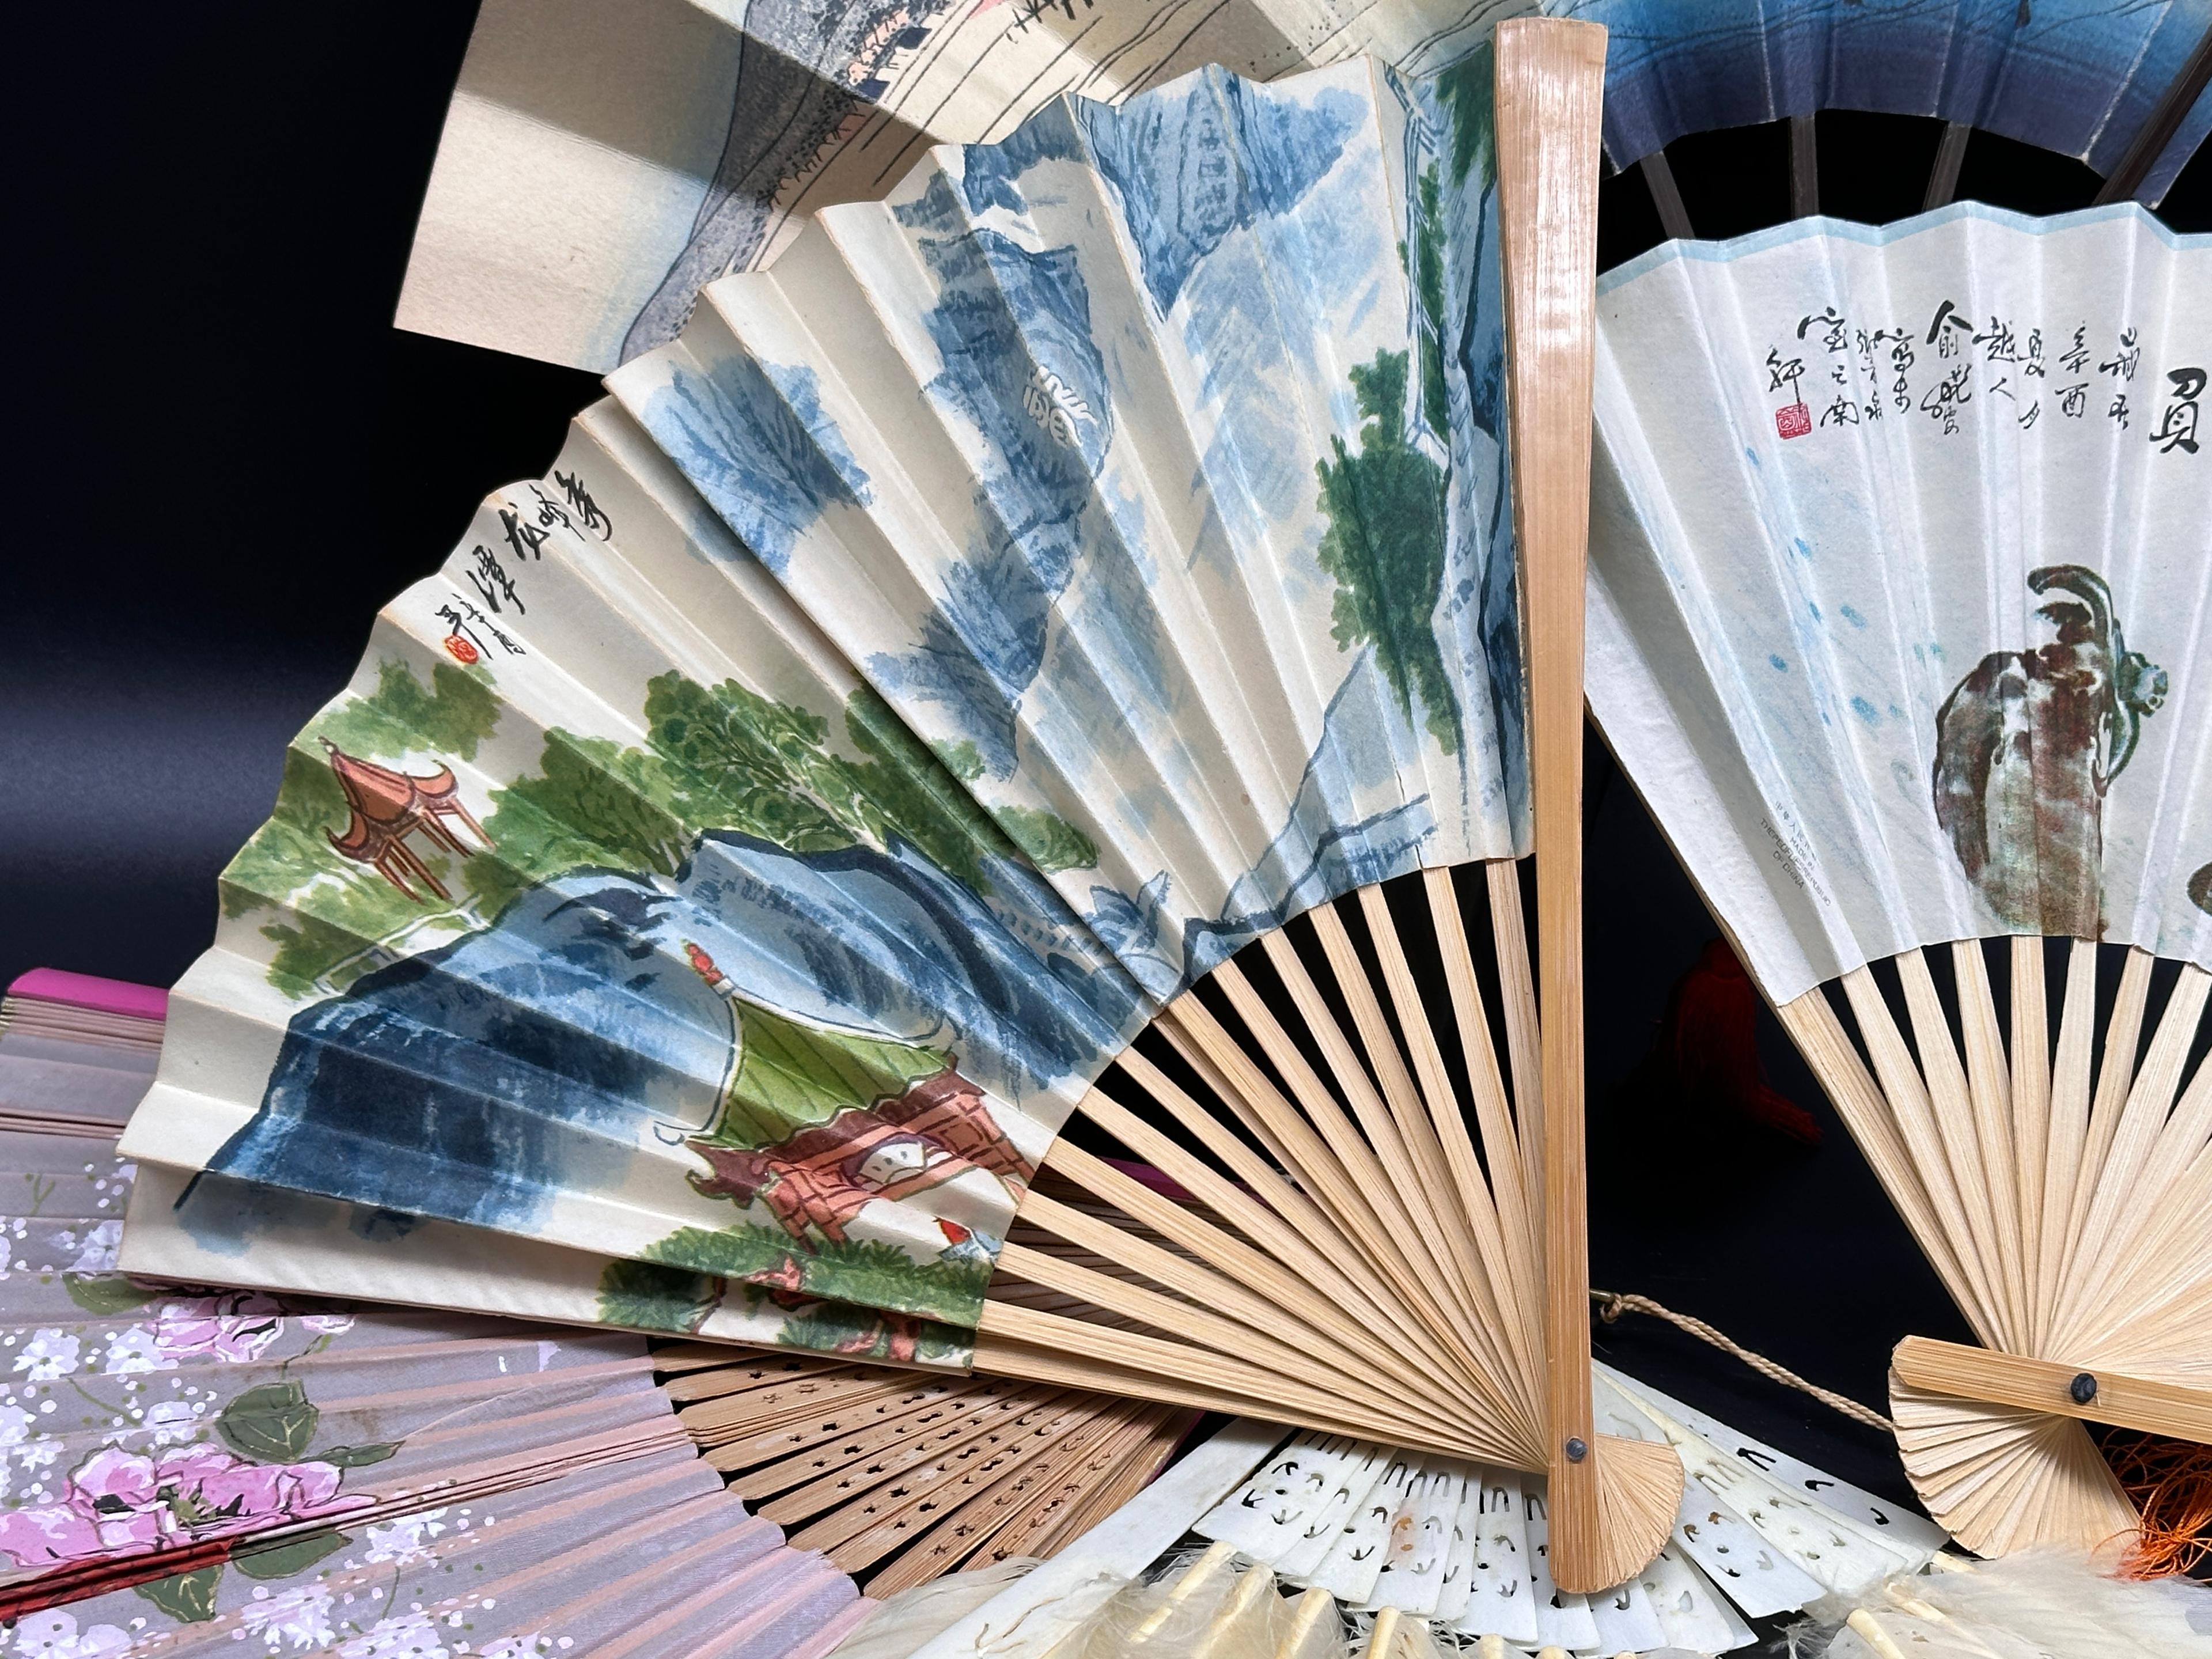 Variety of Vintage Folding Hand Fans